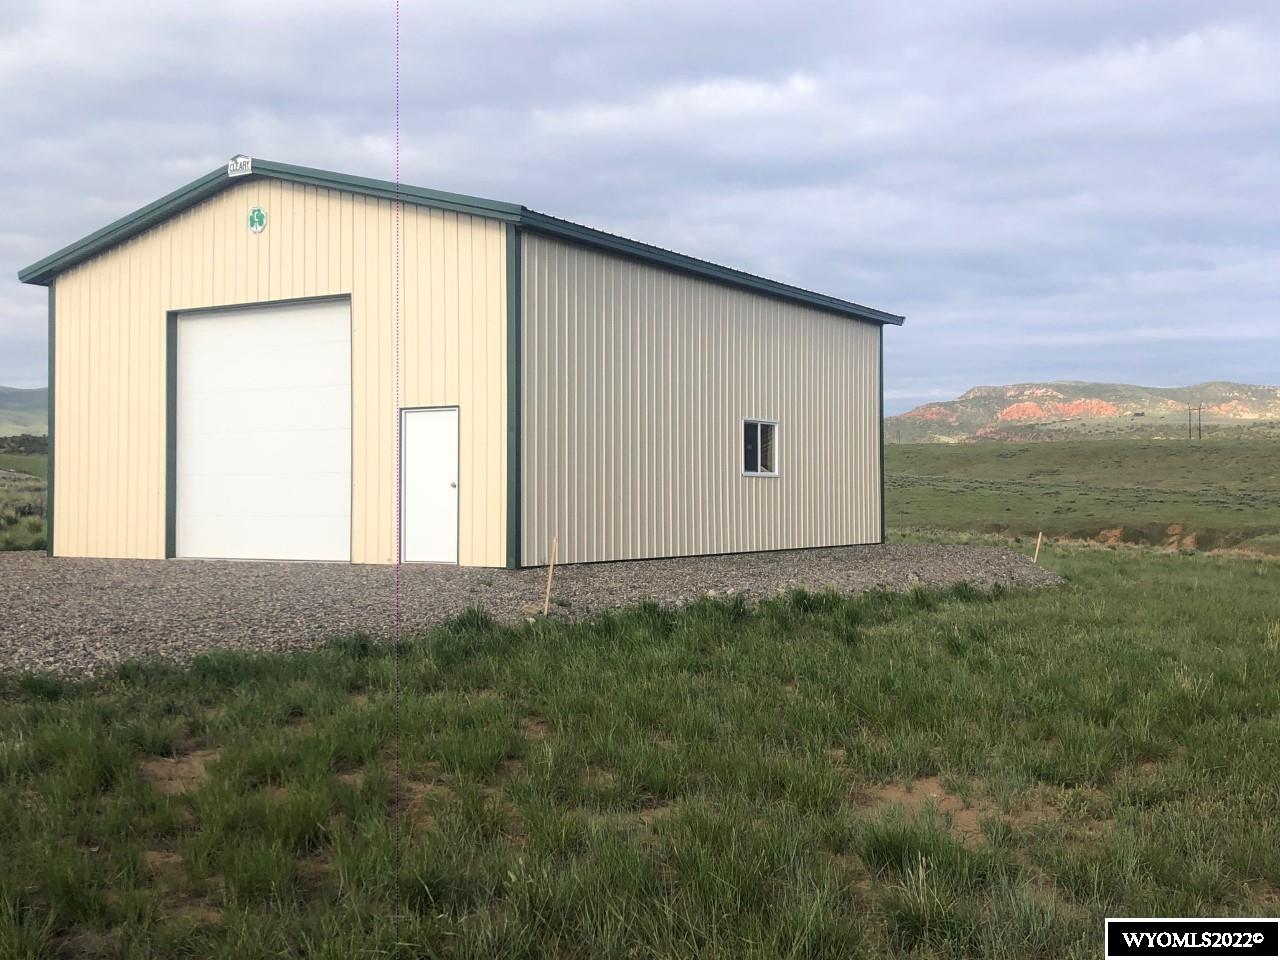 Great corner building lot South of Thermopolis with fantastic views.  New 30' x 40' Cleary shop building with concrete floor already on site, just add your dream house!  Shop has 12' x 12' overhead door as well as walk through door.  Utilities are at property, and include Rocky Mountain Power, city water and sewer, natural gas, and fiberoptic internet.  HOA fees are $100/year for road maintenance.